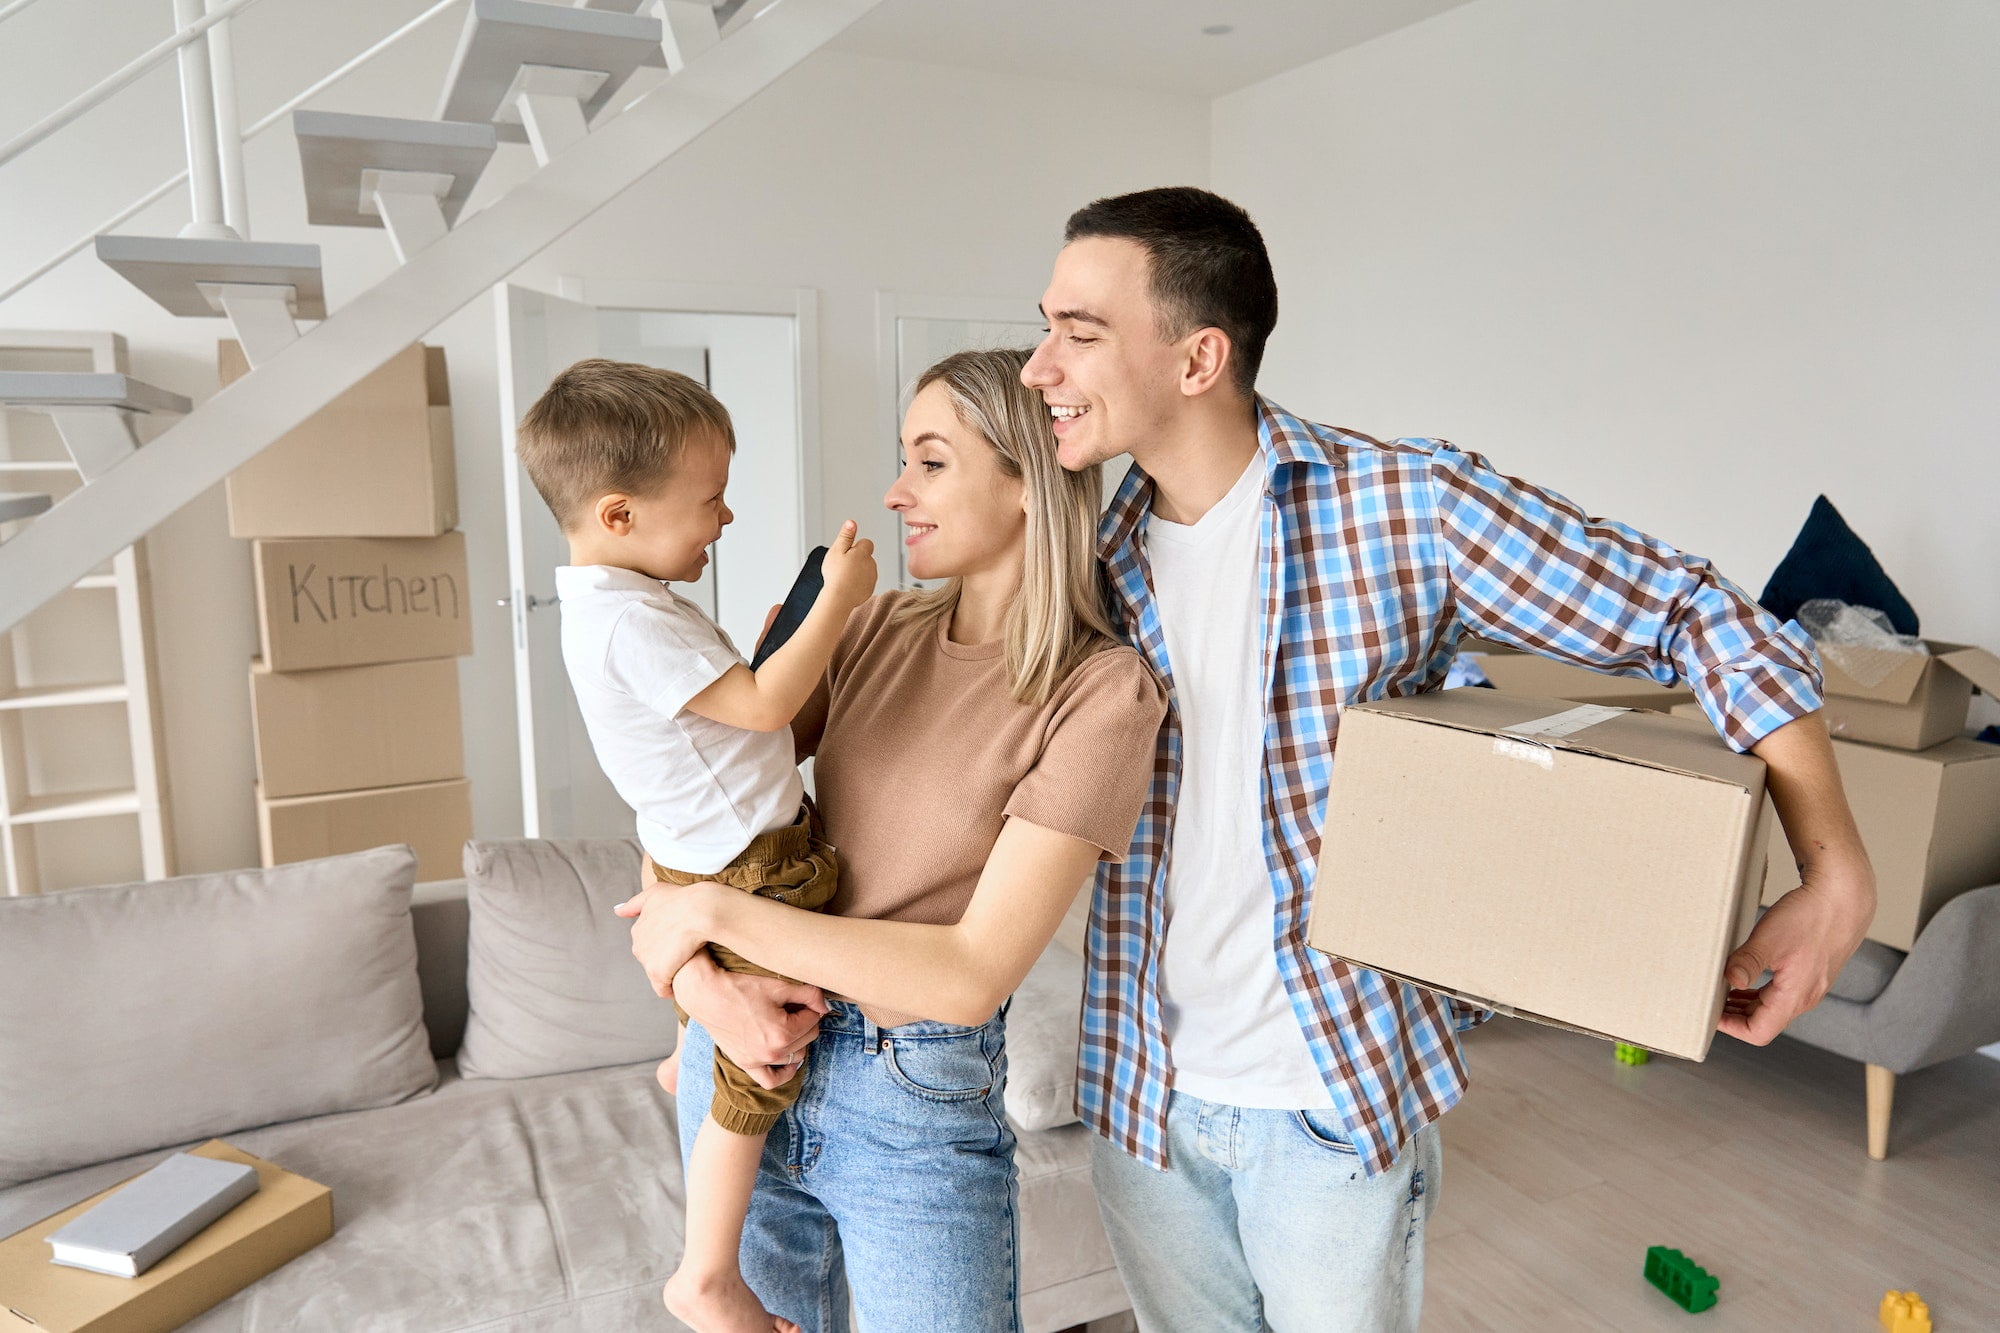 Happy family moving into a new home stock photo.